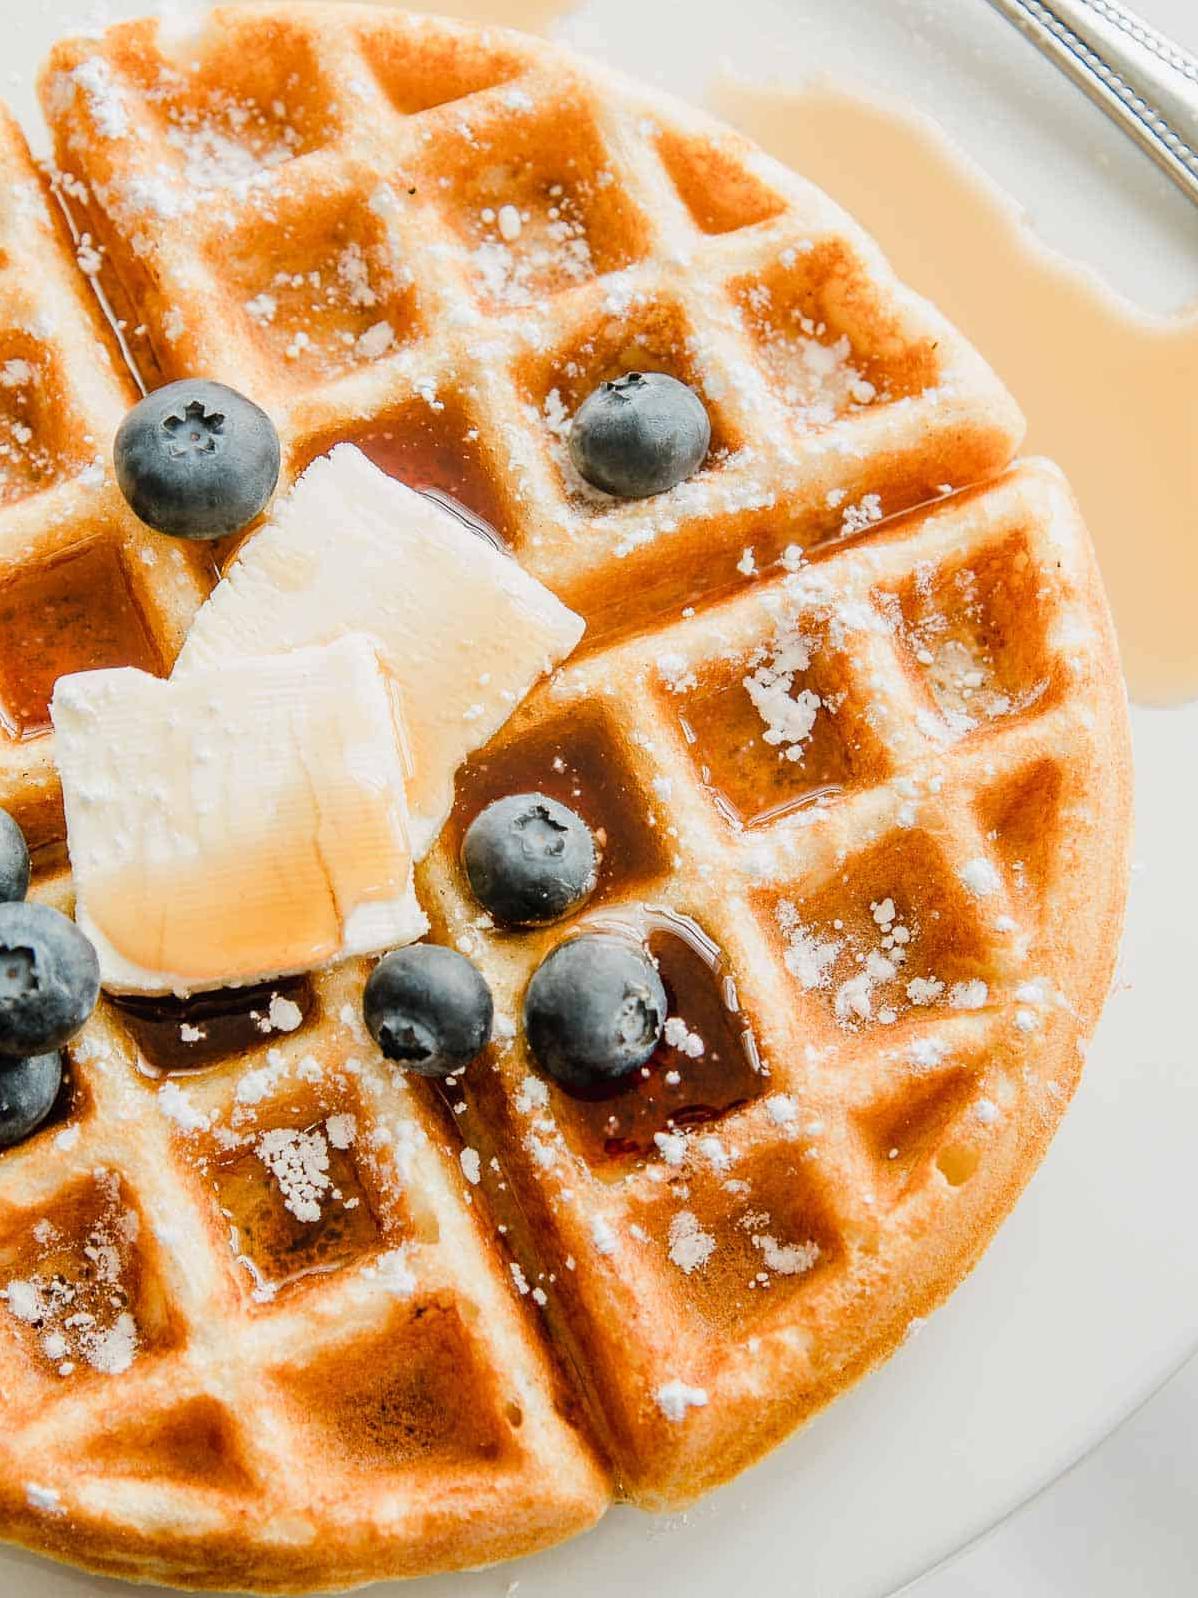  The perfect gluten-free waffle for any breakfast occasion.